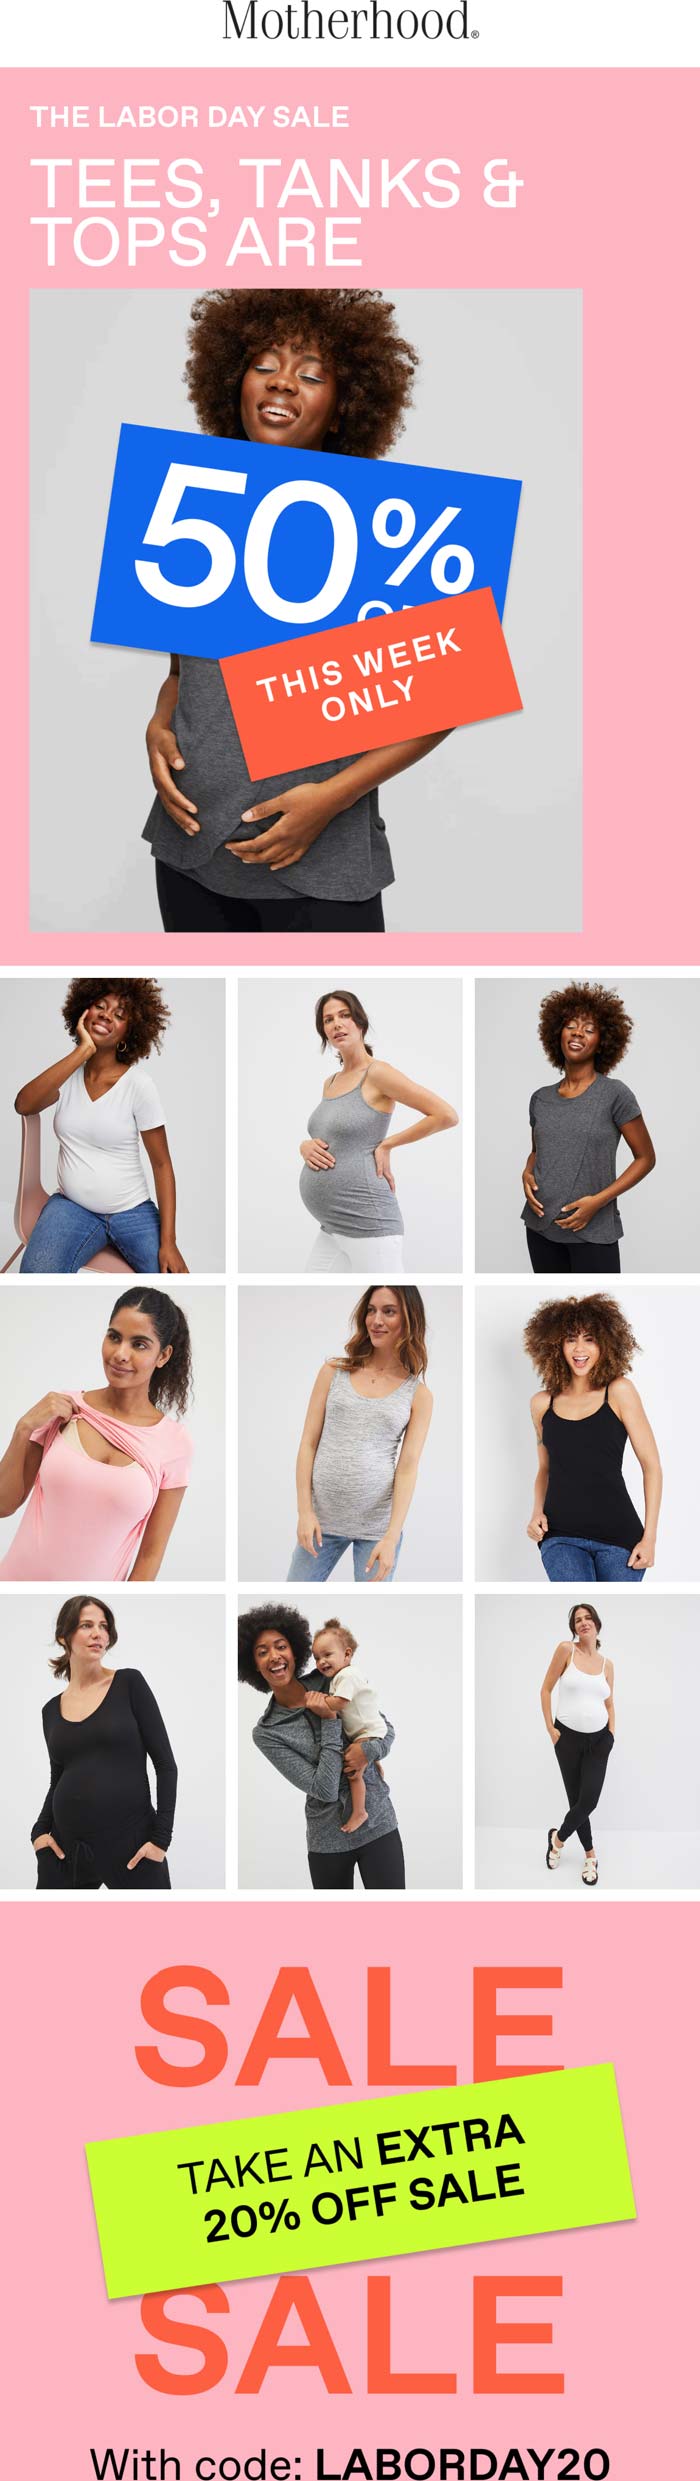 Motherhood stores Coupon  Tops are 50% off at Motherhood maternity, and sale is 20% off online via promo LABORDAY20 #motherhood 